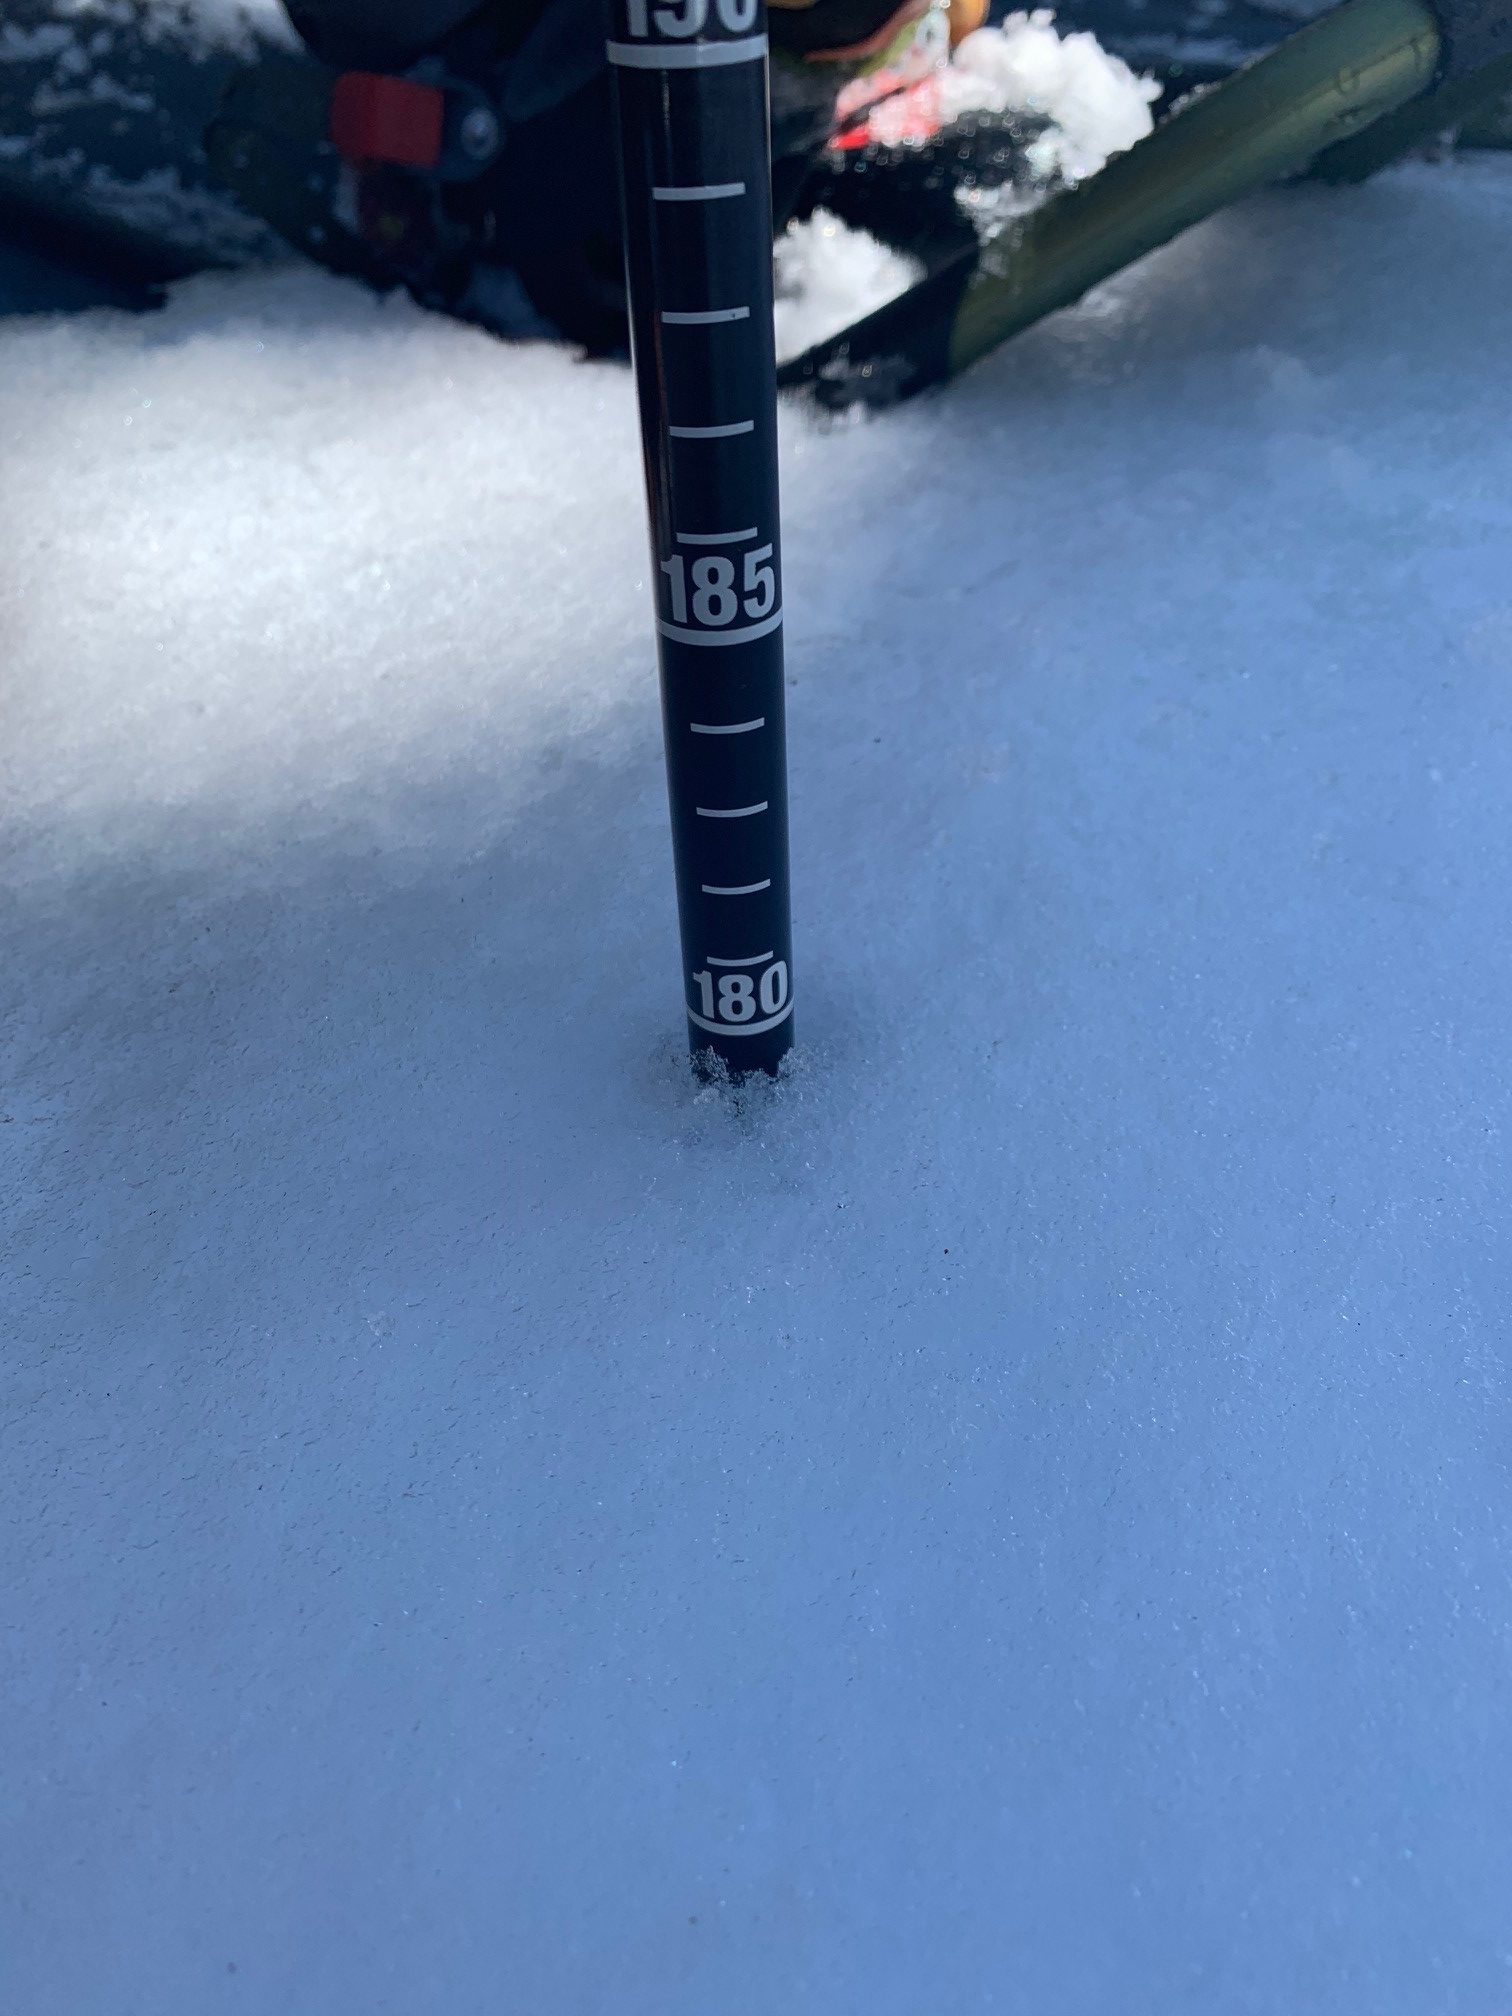 A rod marked with centermeters sticks out of the snow, which reaches to nearly 180 centimeters.